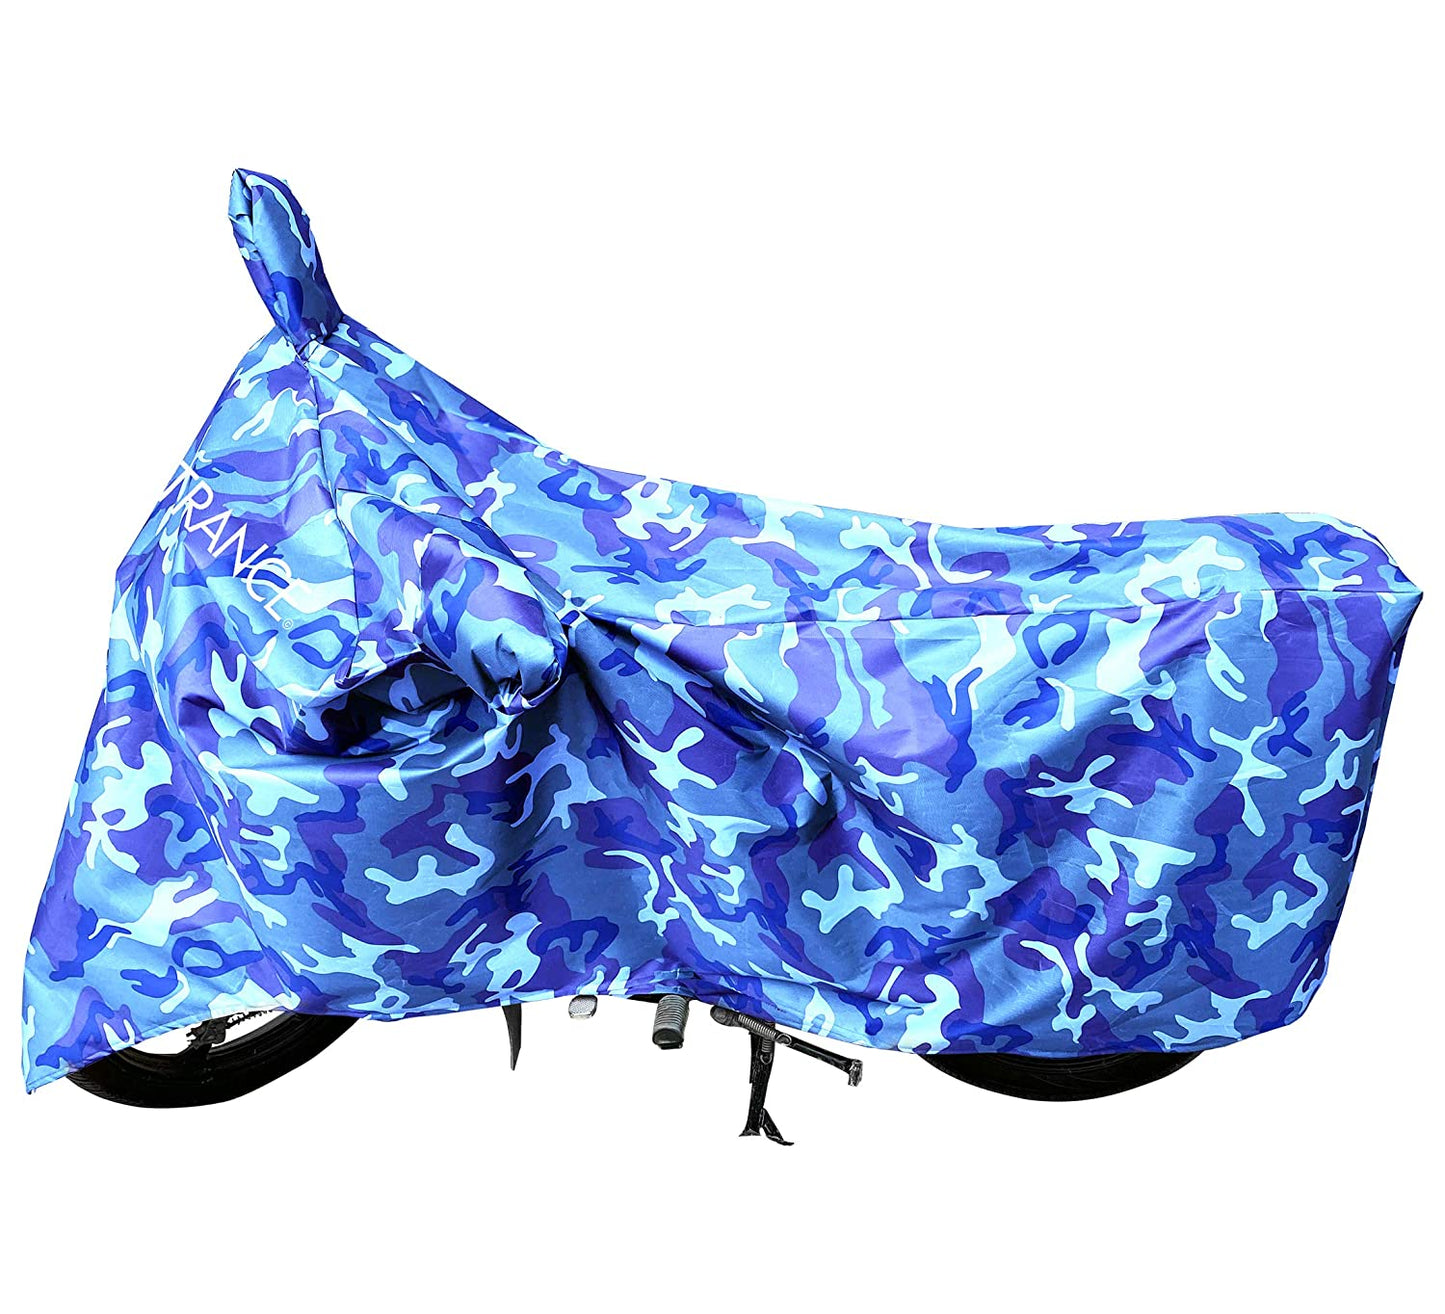 MotoTrance Jungle Bike Body Covers For TVS Heavy Duty Super XL - Interlock-Stitched Waterproof and Heat Resistant with Mirror Pockets